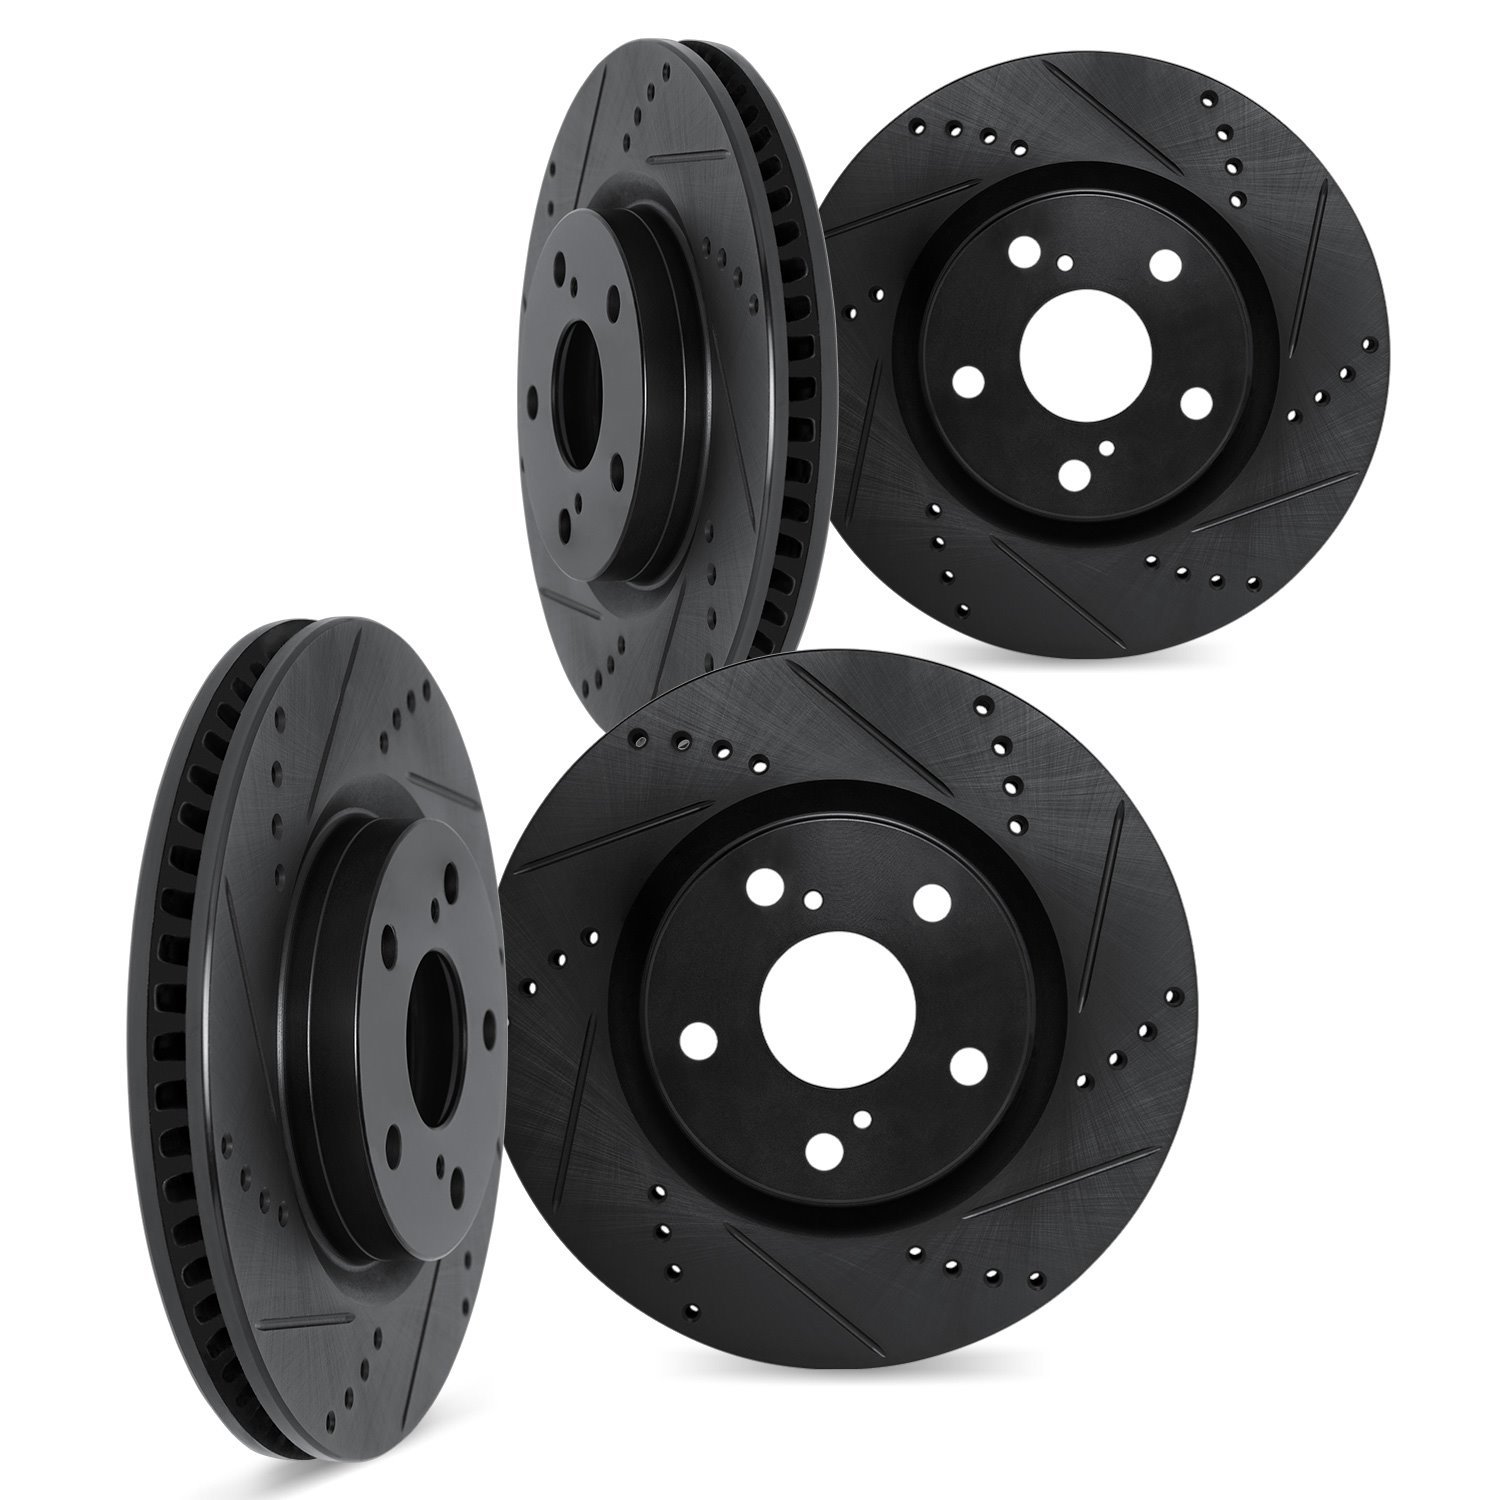 8004-13029 Drilled/Slotted Brake Rotors [Black], Fits Select Subaru, Position: Front and Rear